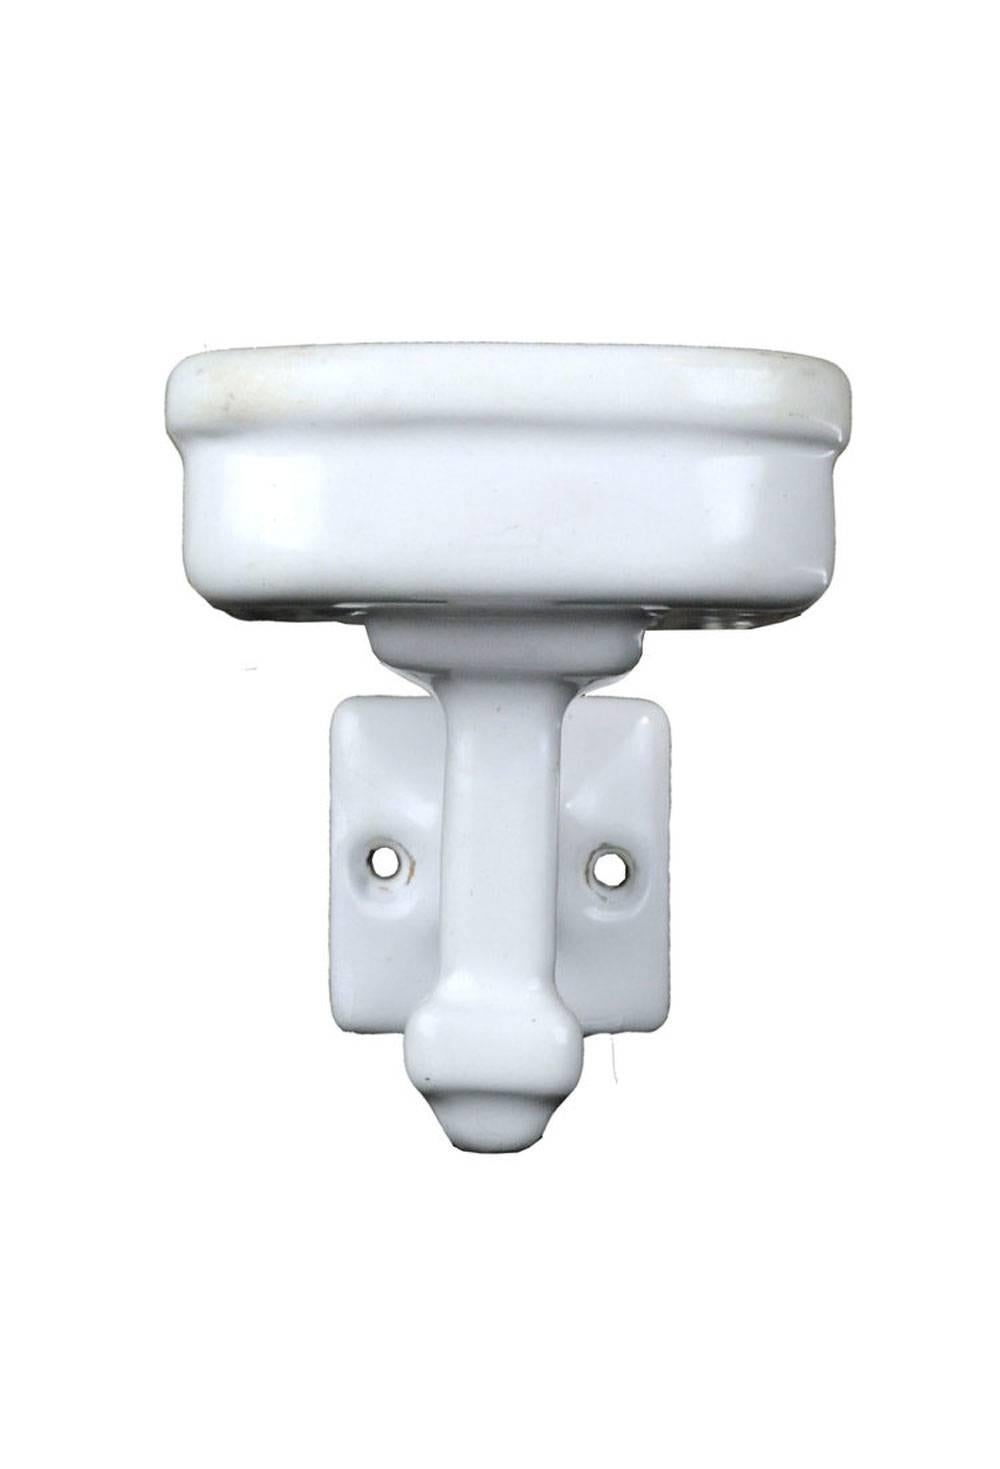 Beautiful white enamel wall-mount cup holder with Classic appeal.